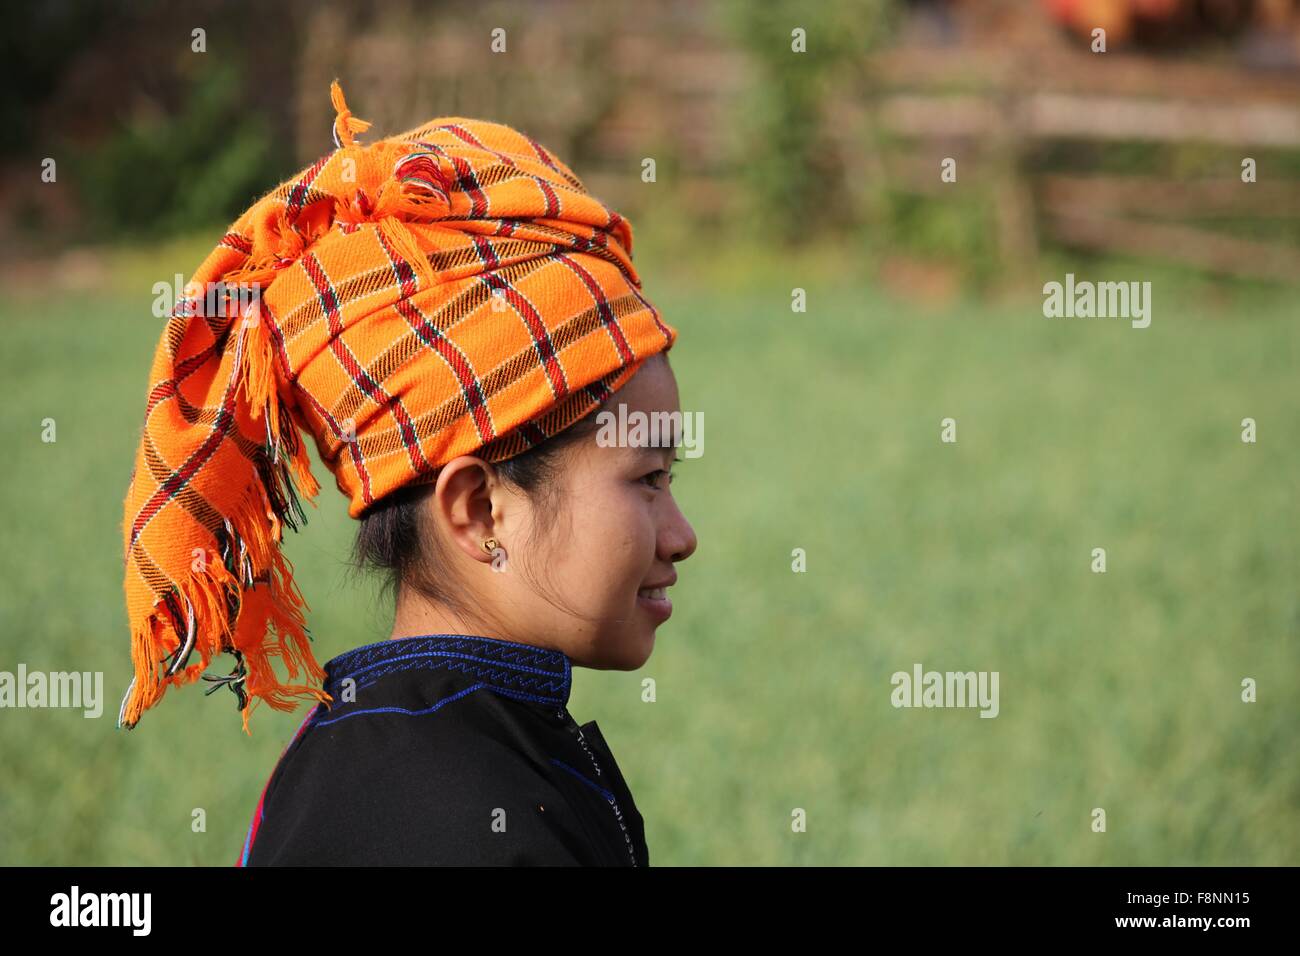 Typical girl from Shan State in Myanmar. The orangey, red headscarfs are worn by women of the Pa-O ethnic group. The Pa’O people Stock Photo